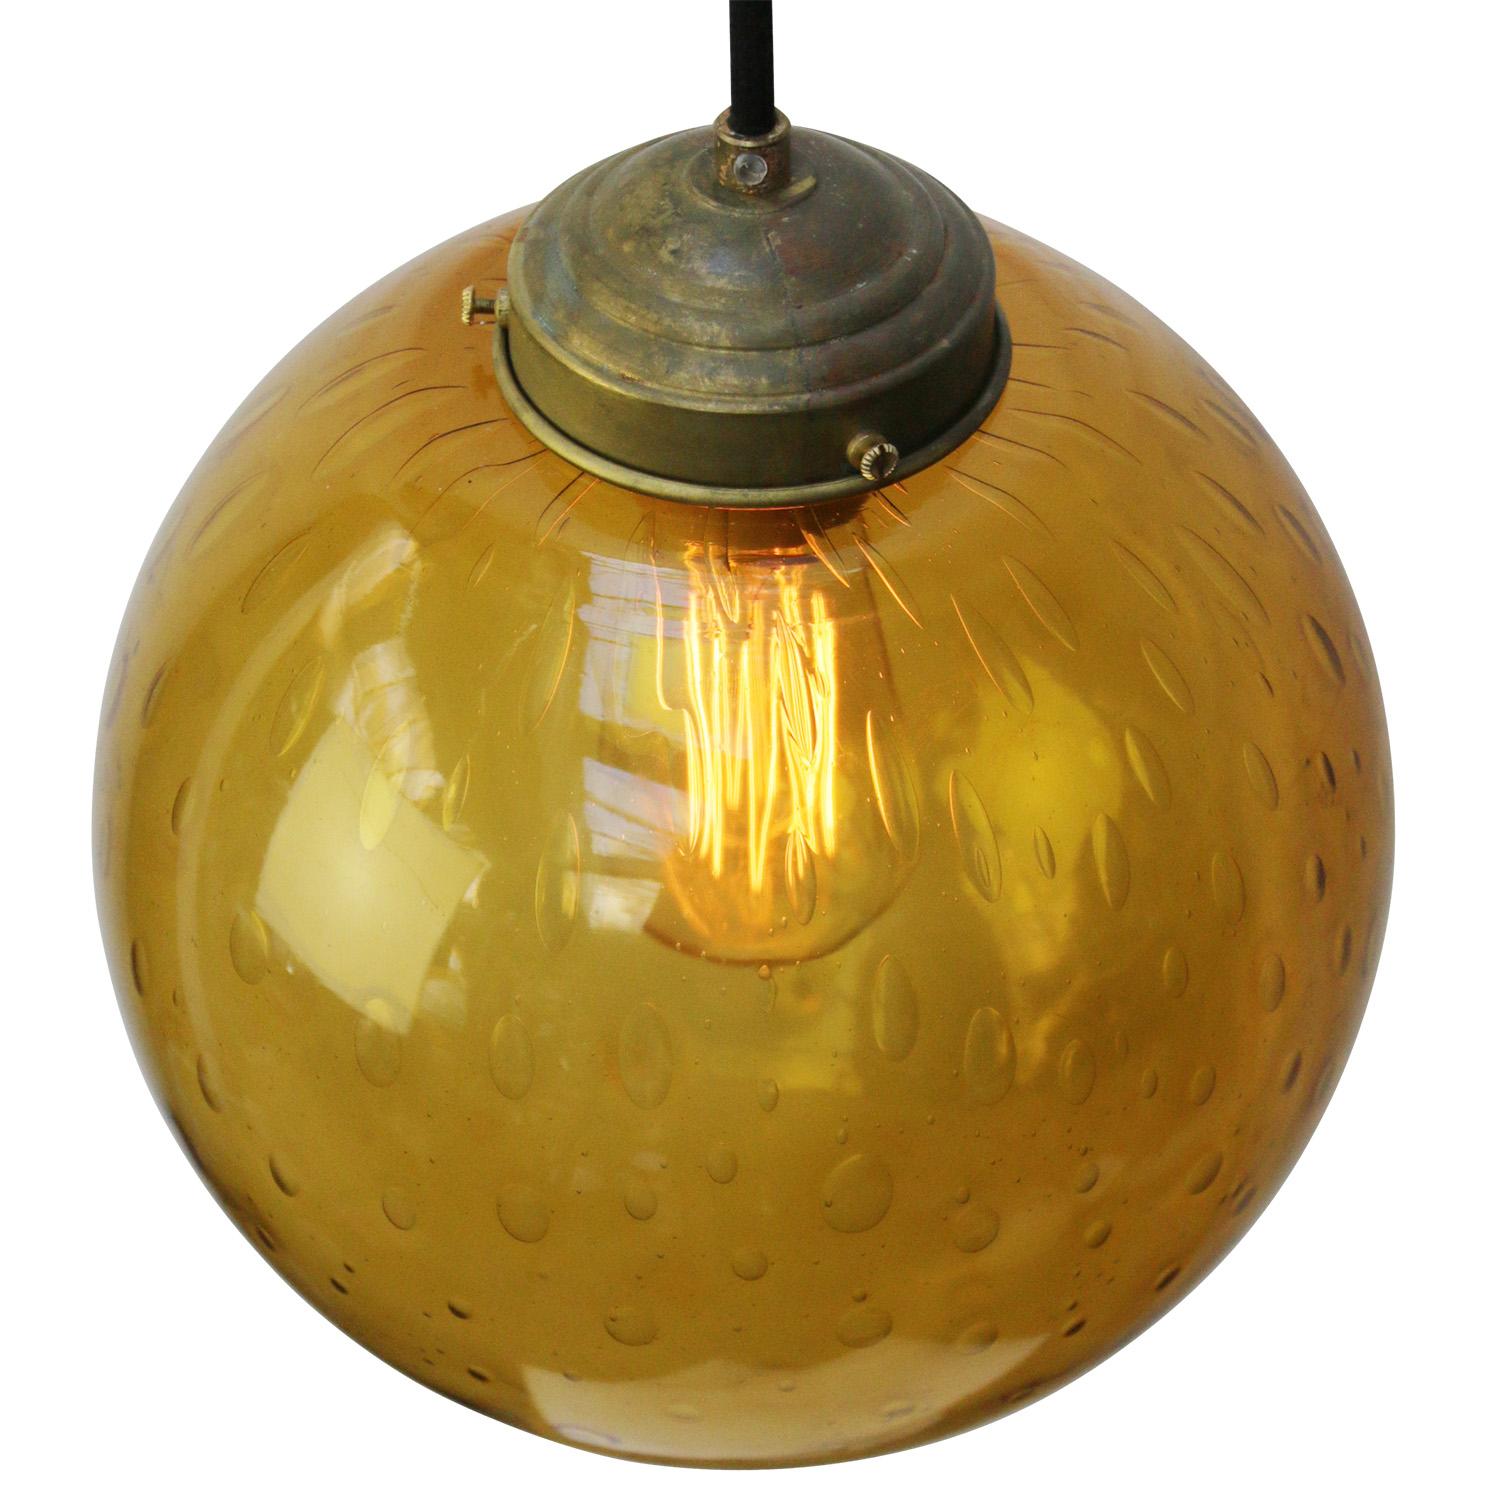 Amber air bubble glass pendant
Brass top
2 meter black flex

Weight: 1.80 kg / 4 lb

Priced per individual item. All lamps have been made suitable by international standards for incandescent light bulbs, energy-efficient and LED bulbs. E26/E27